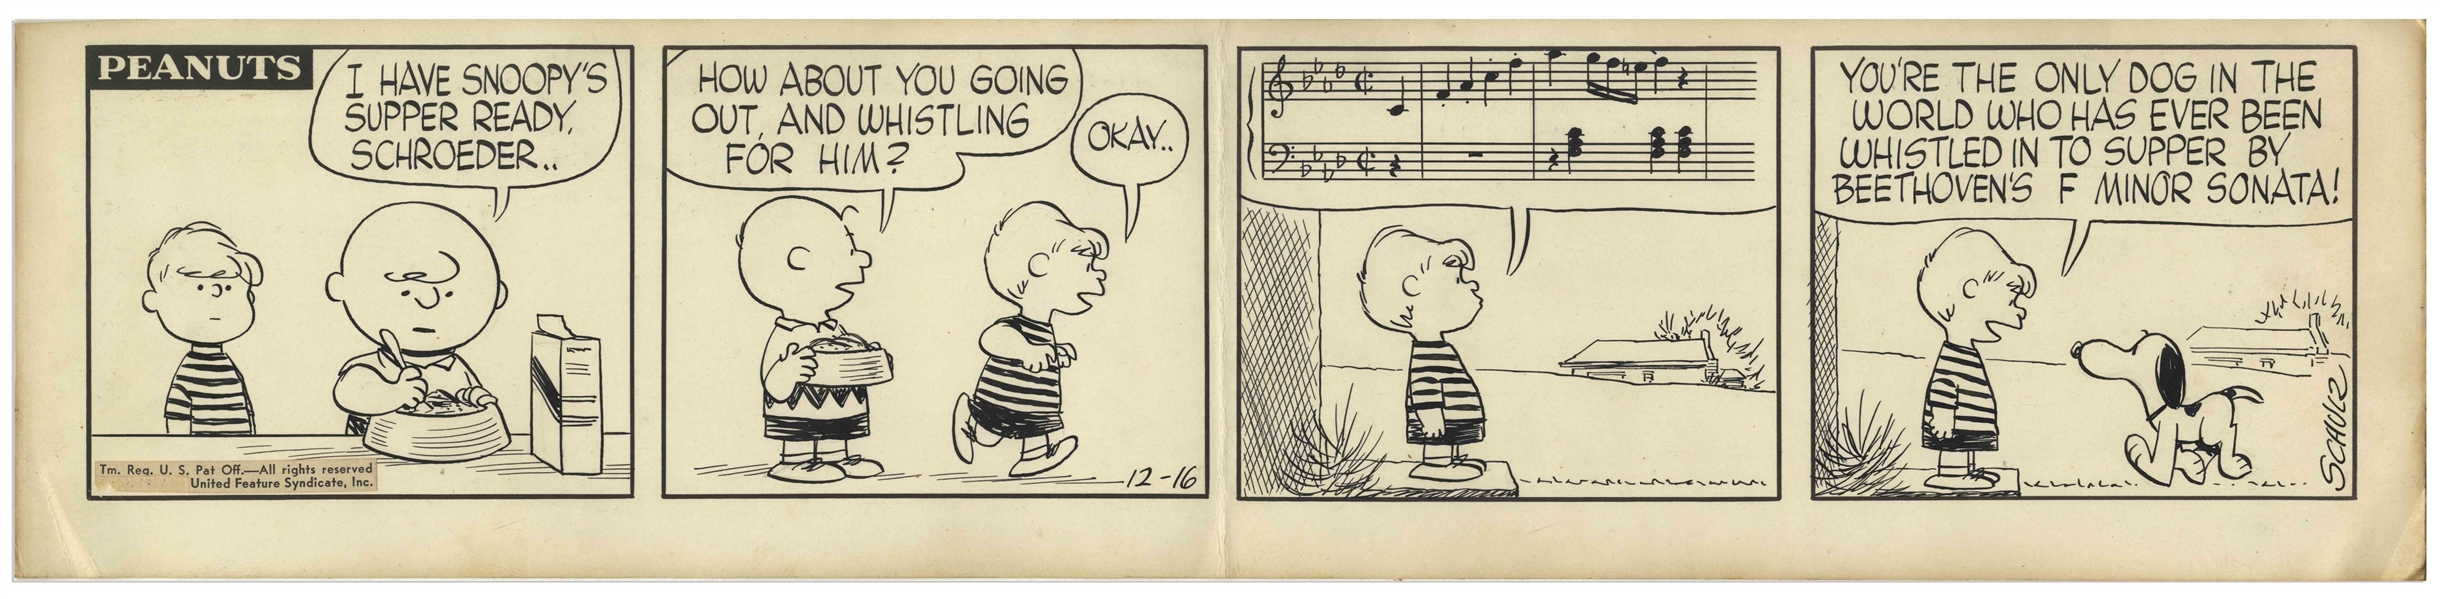 Charles Schulz Original Hand-Drawn ''Peanuts'' Comic Strip -- In This Strip From 1957, Schulz Draws the Score From Beethoven's Piano Sonata No. 1 to Call in Snoopy, Who Trots in on 4 Feet